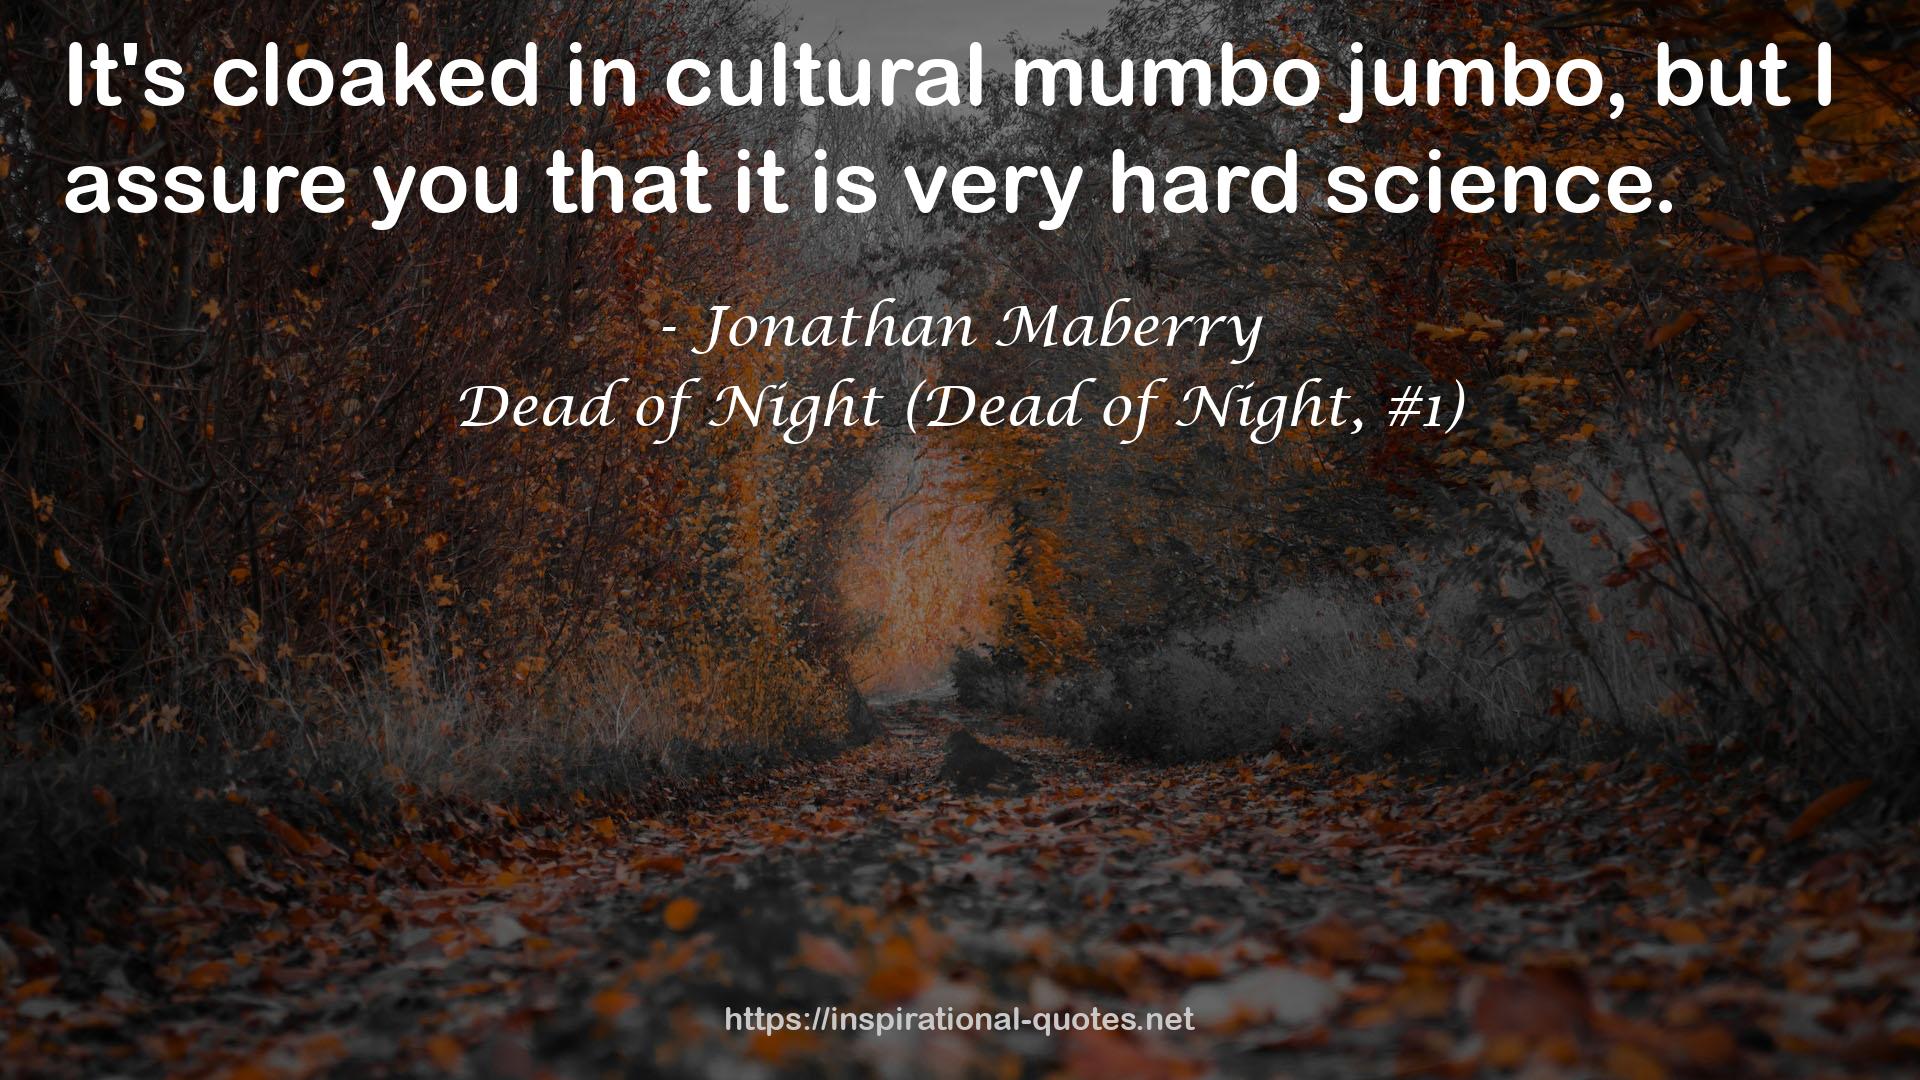 Dead of Night (Dead of Night, #1) QUOTES